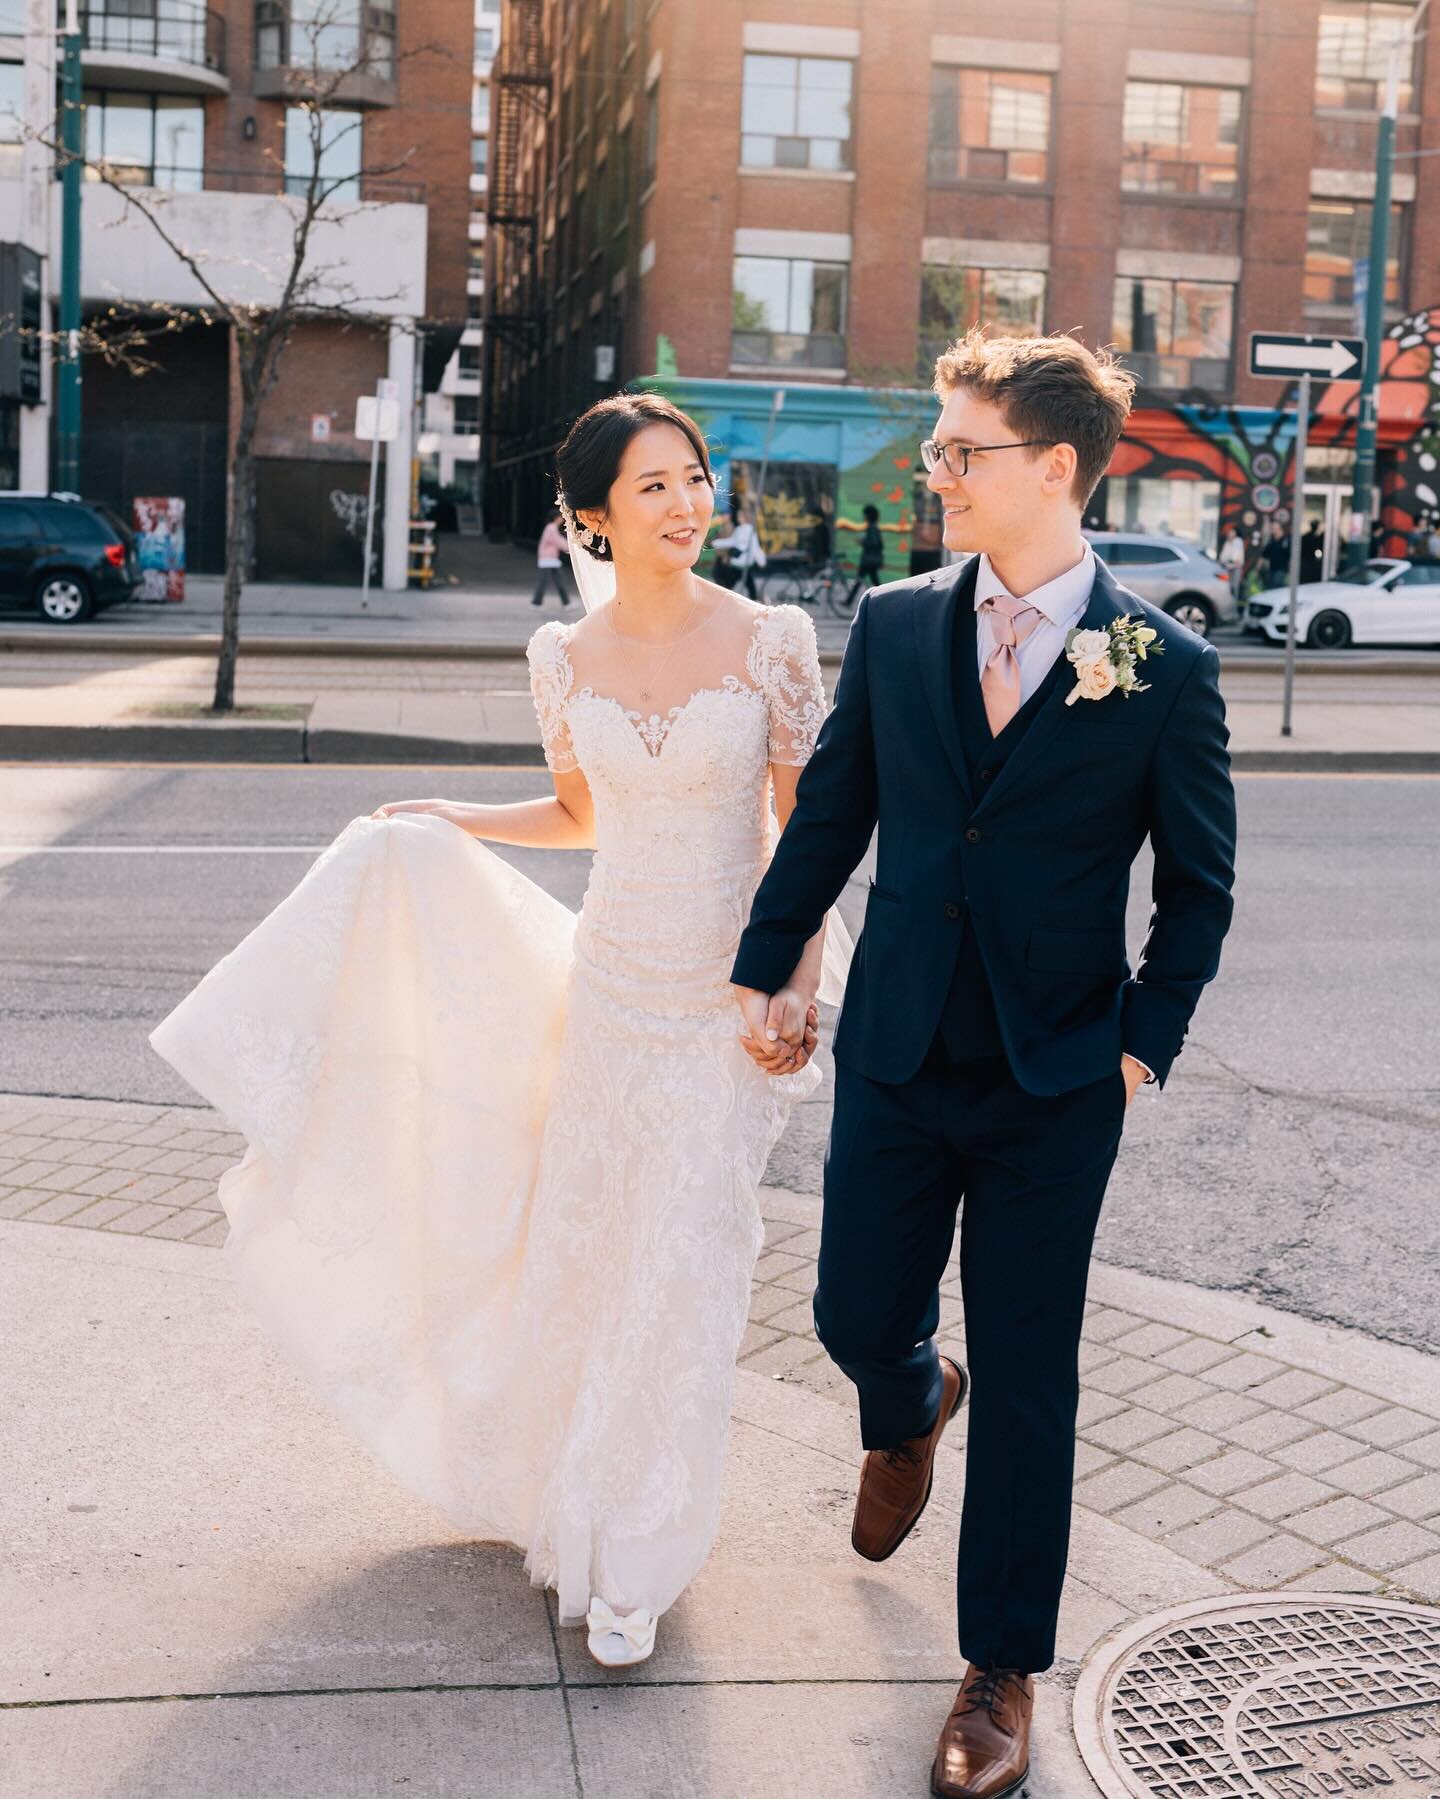 .
.
I had the pleasure of planning H&amp;B&lsquo;s wedding day from start to finish. With most of the guests flying into the city, they desired a small, intimate wedding where people could connect, reunite, party, and have the best night of their liv